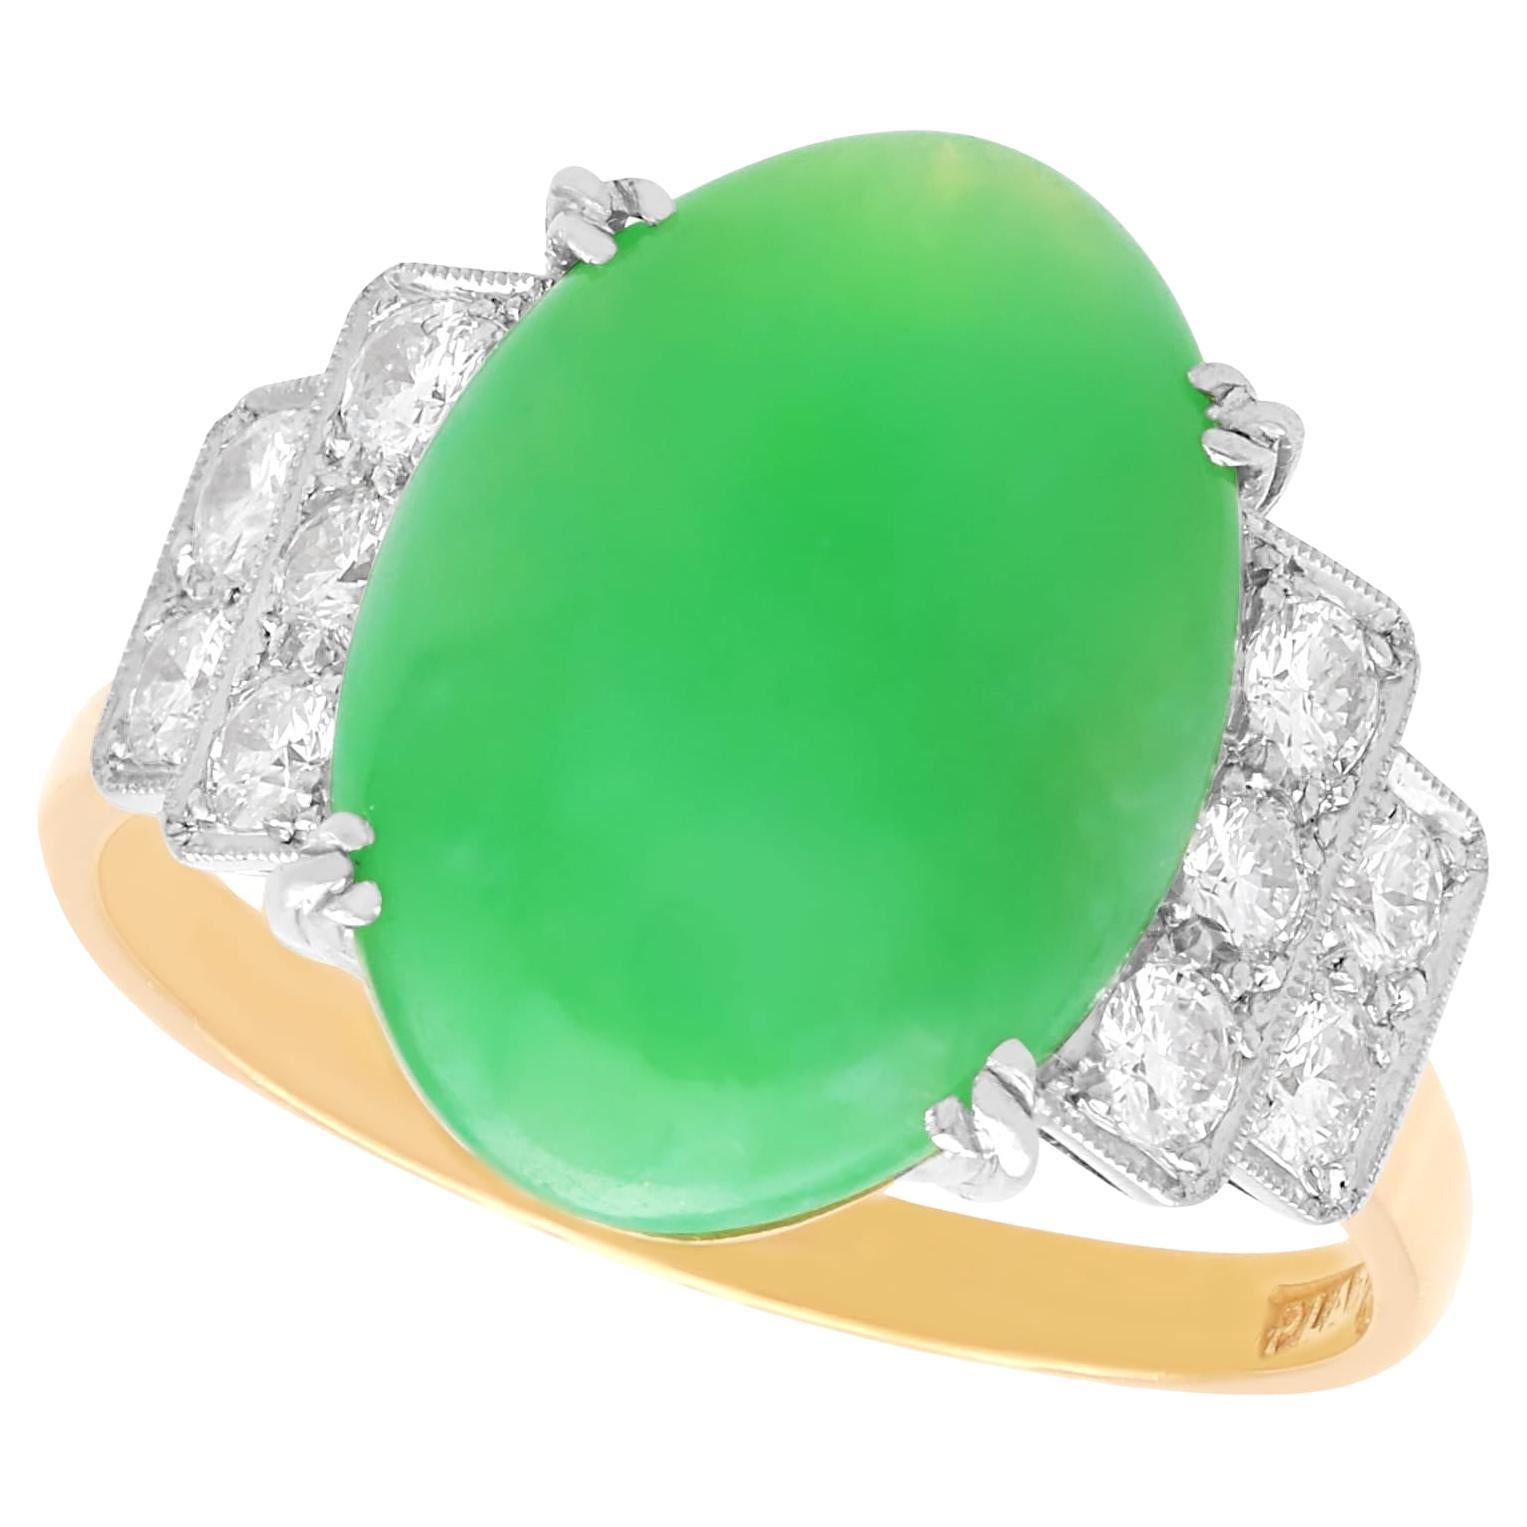 Vintage 7.02ct Jadeite and 0.70ct Diamond 22k Yellow Gold Dress Ring For Sale